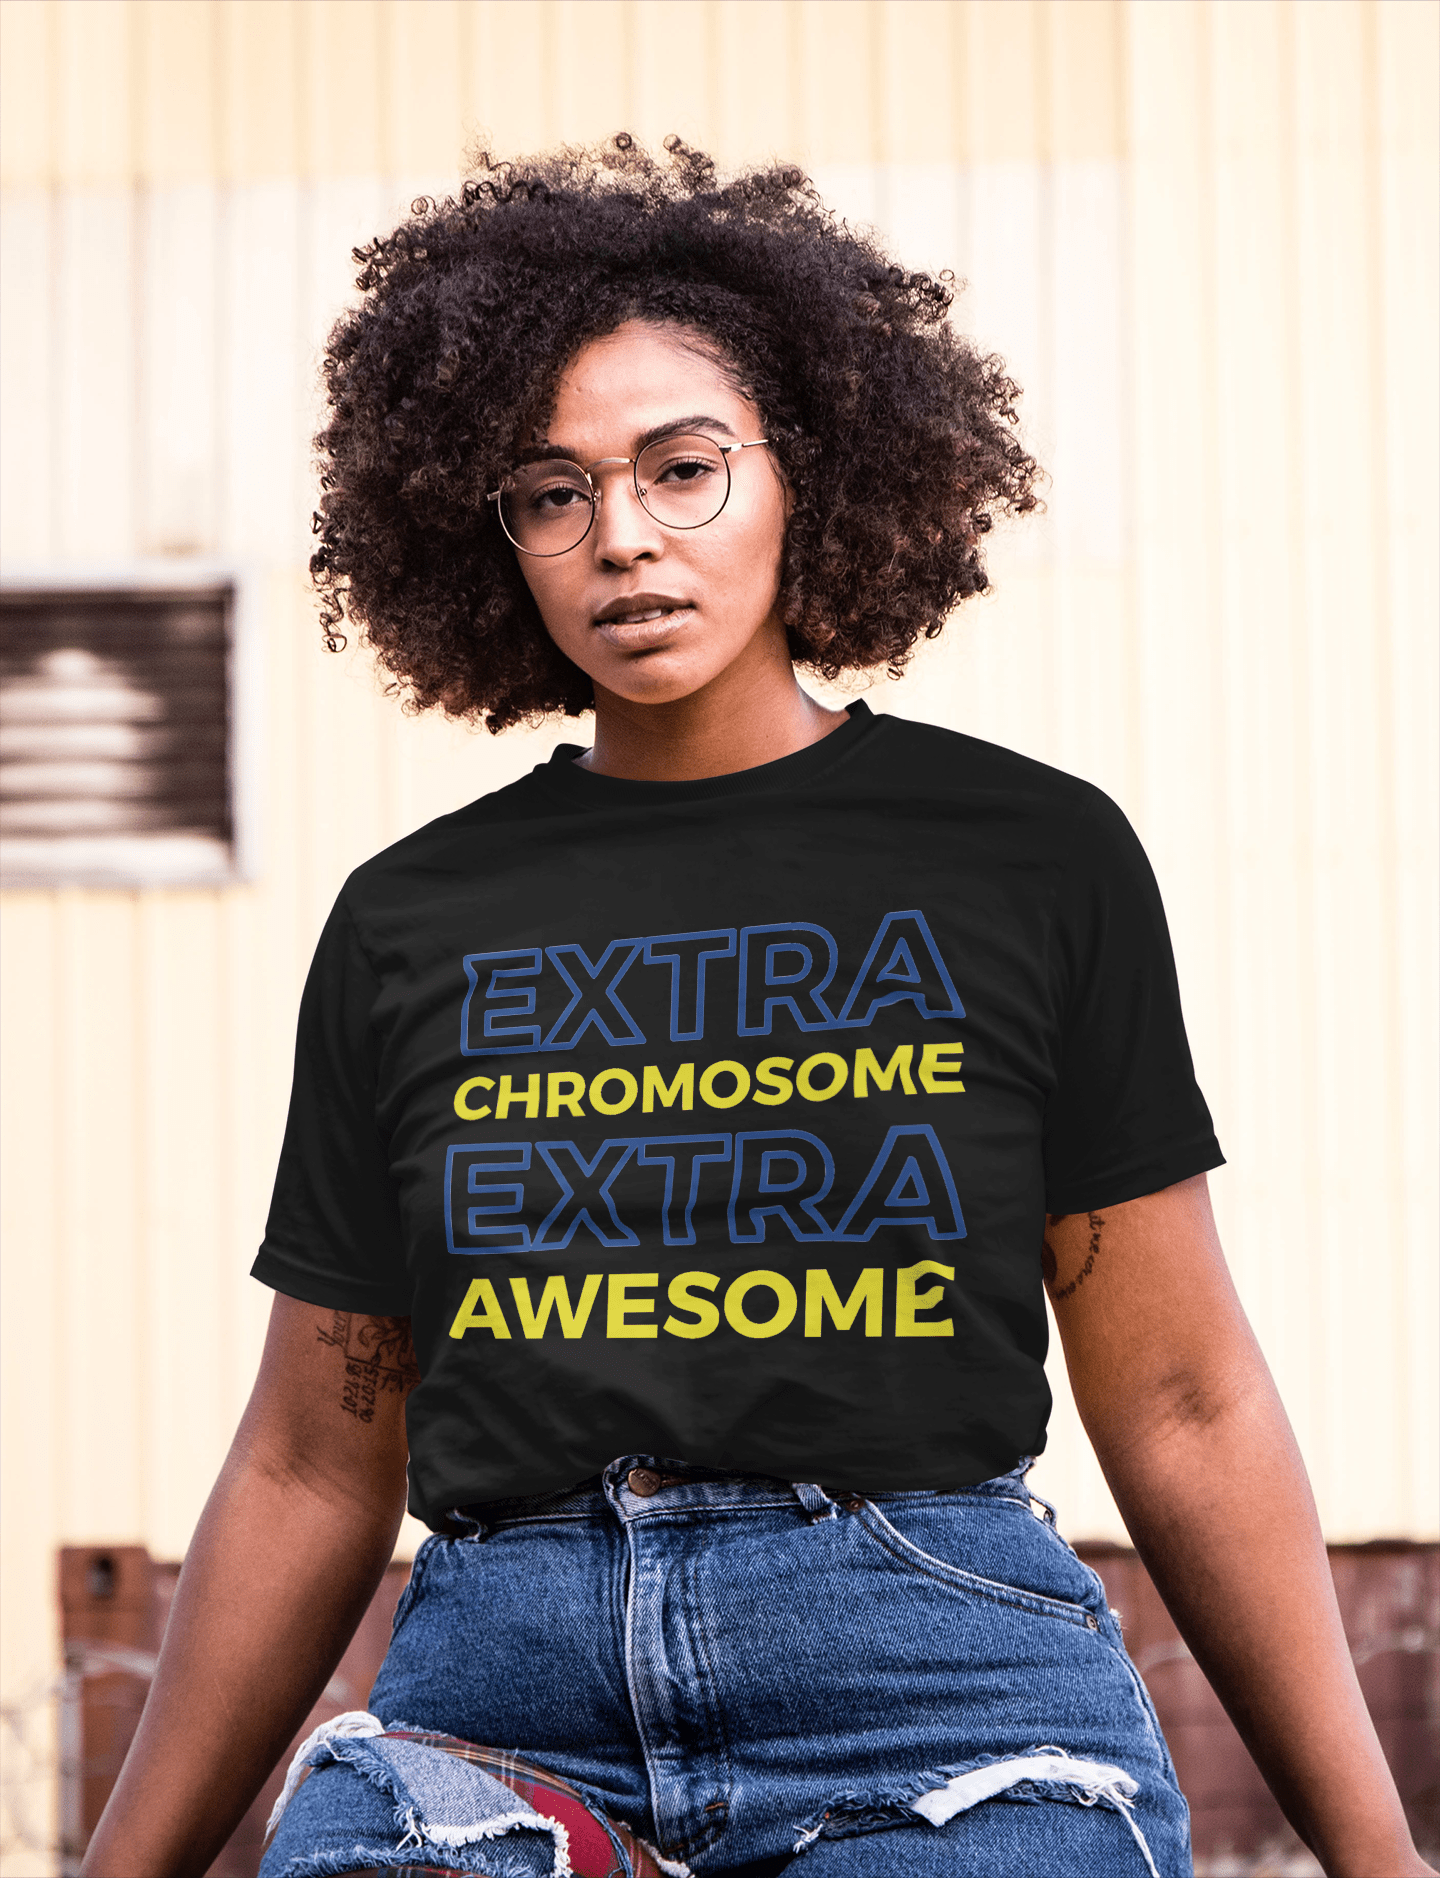 Women's Graphic T-Shirt Down Syndrome Extra Chromosome Extra Awesome Deep Black Round Neck